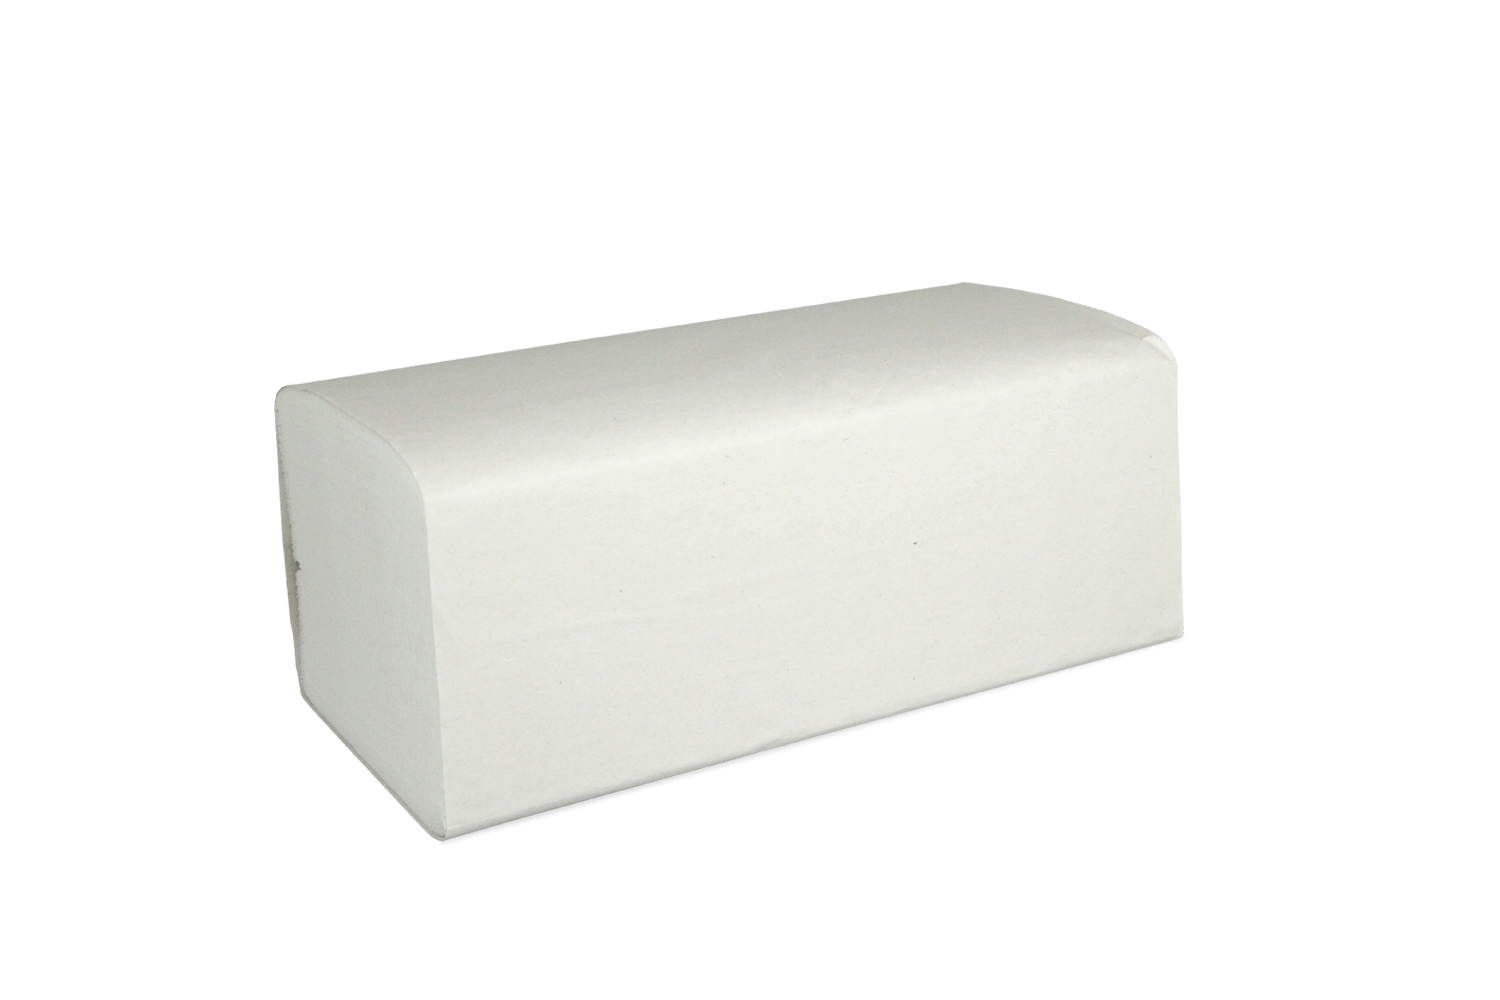 Z-fold hand towel cellulose 2ply 21x24cm 20x160 sheets